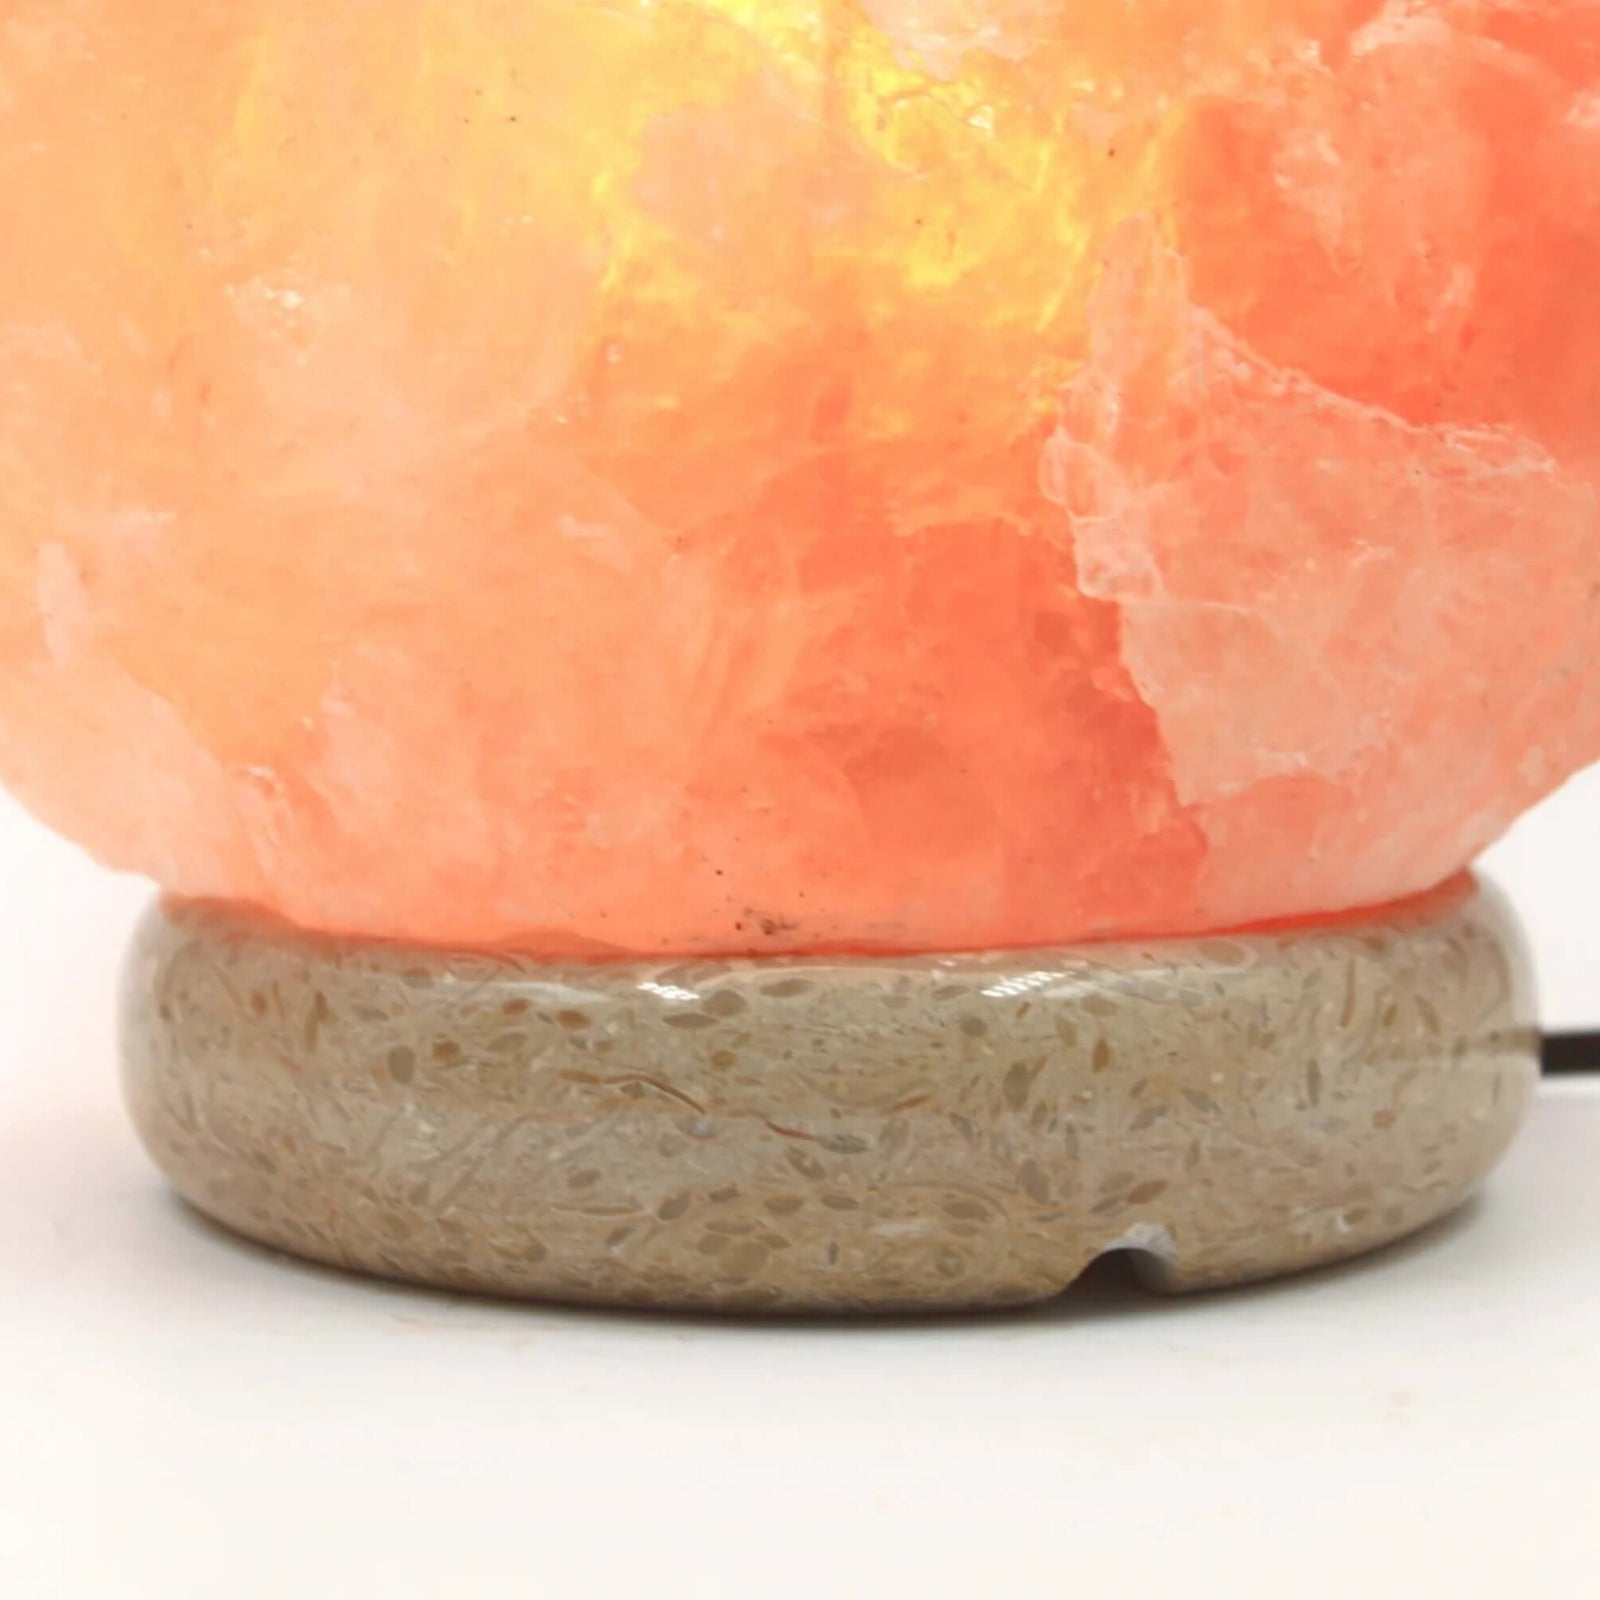 Marble Base For Himalayan Salt Lamps (Fits All Sizes) - Himalayan Trading Co. Himalayan Salt Lamp Himalayan Pink Salt